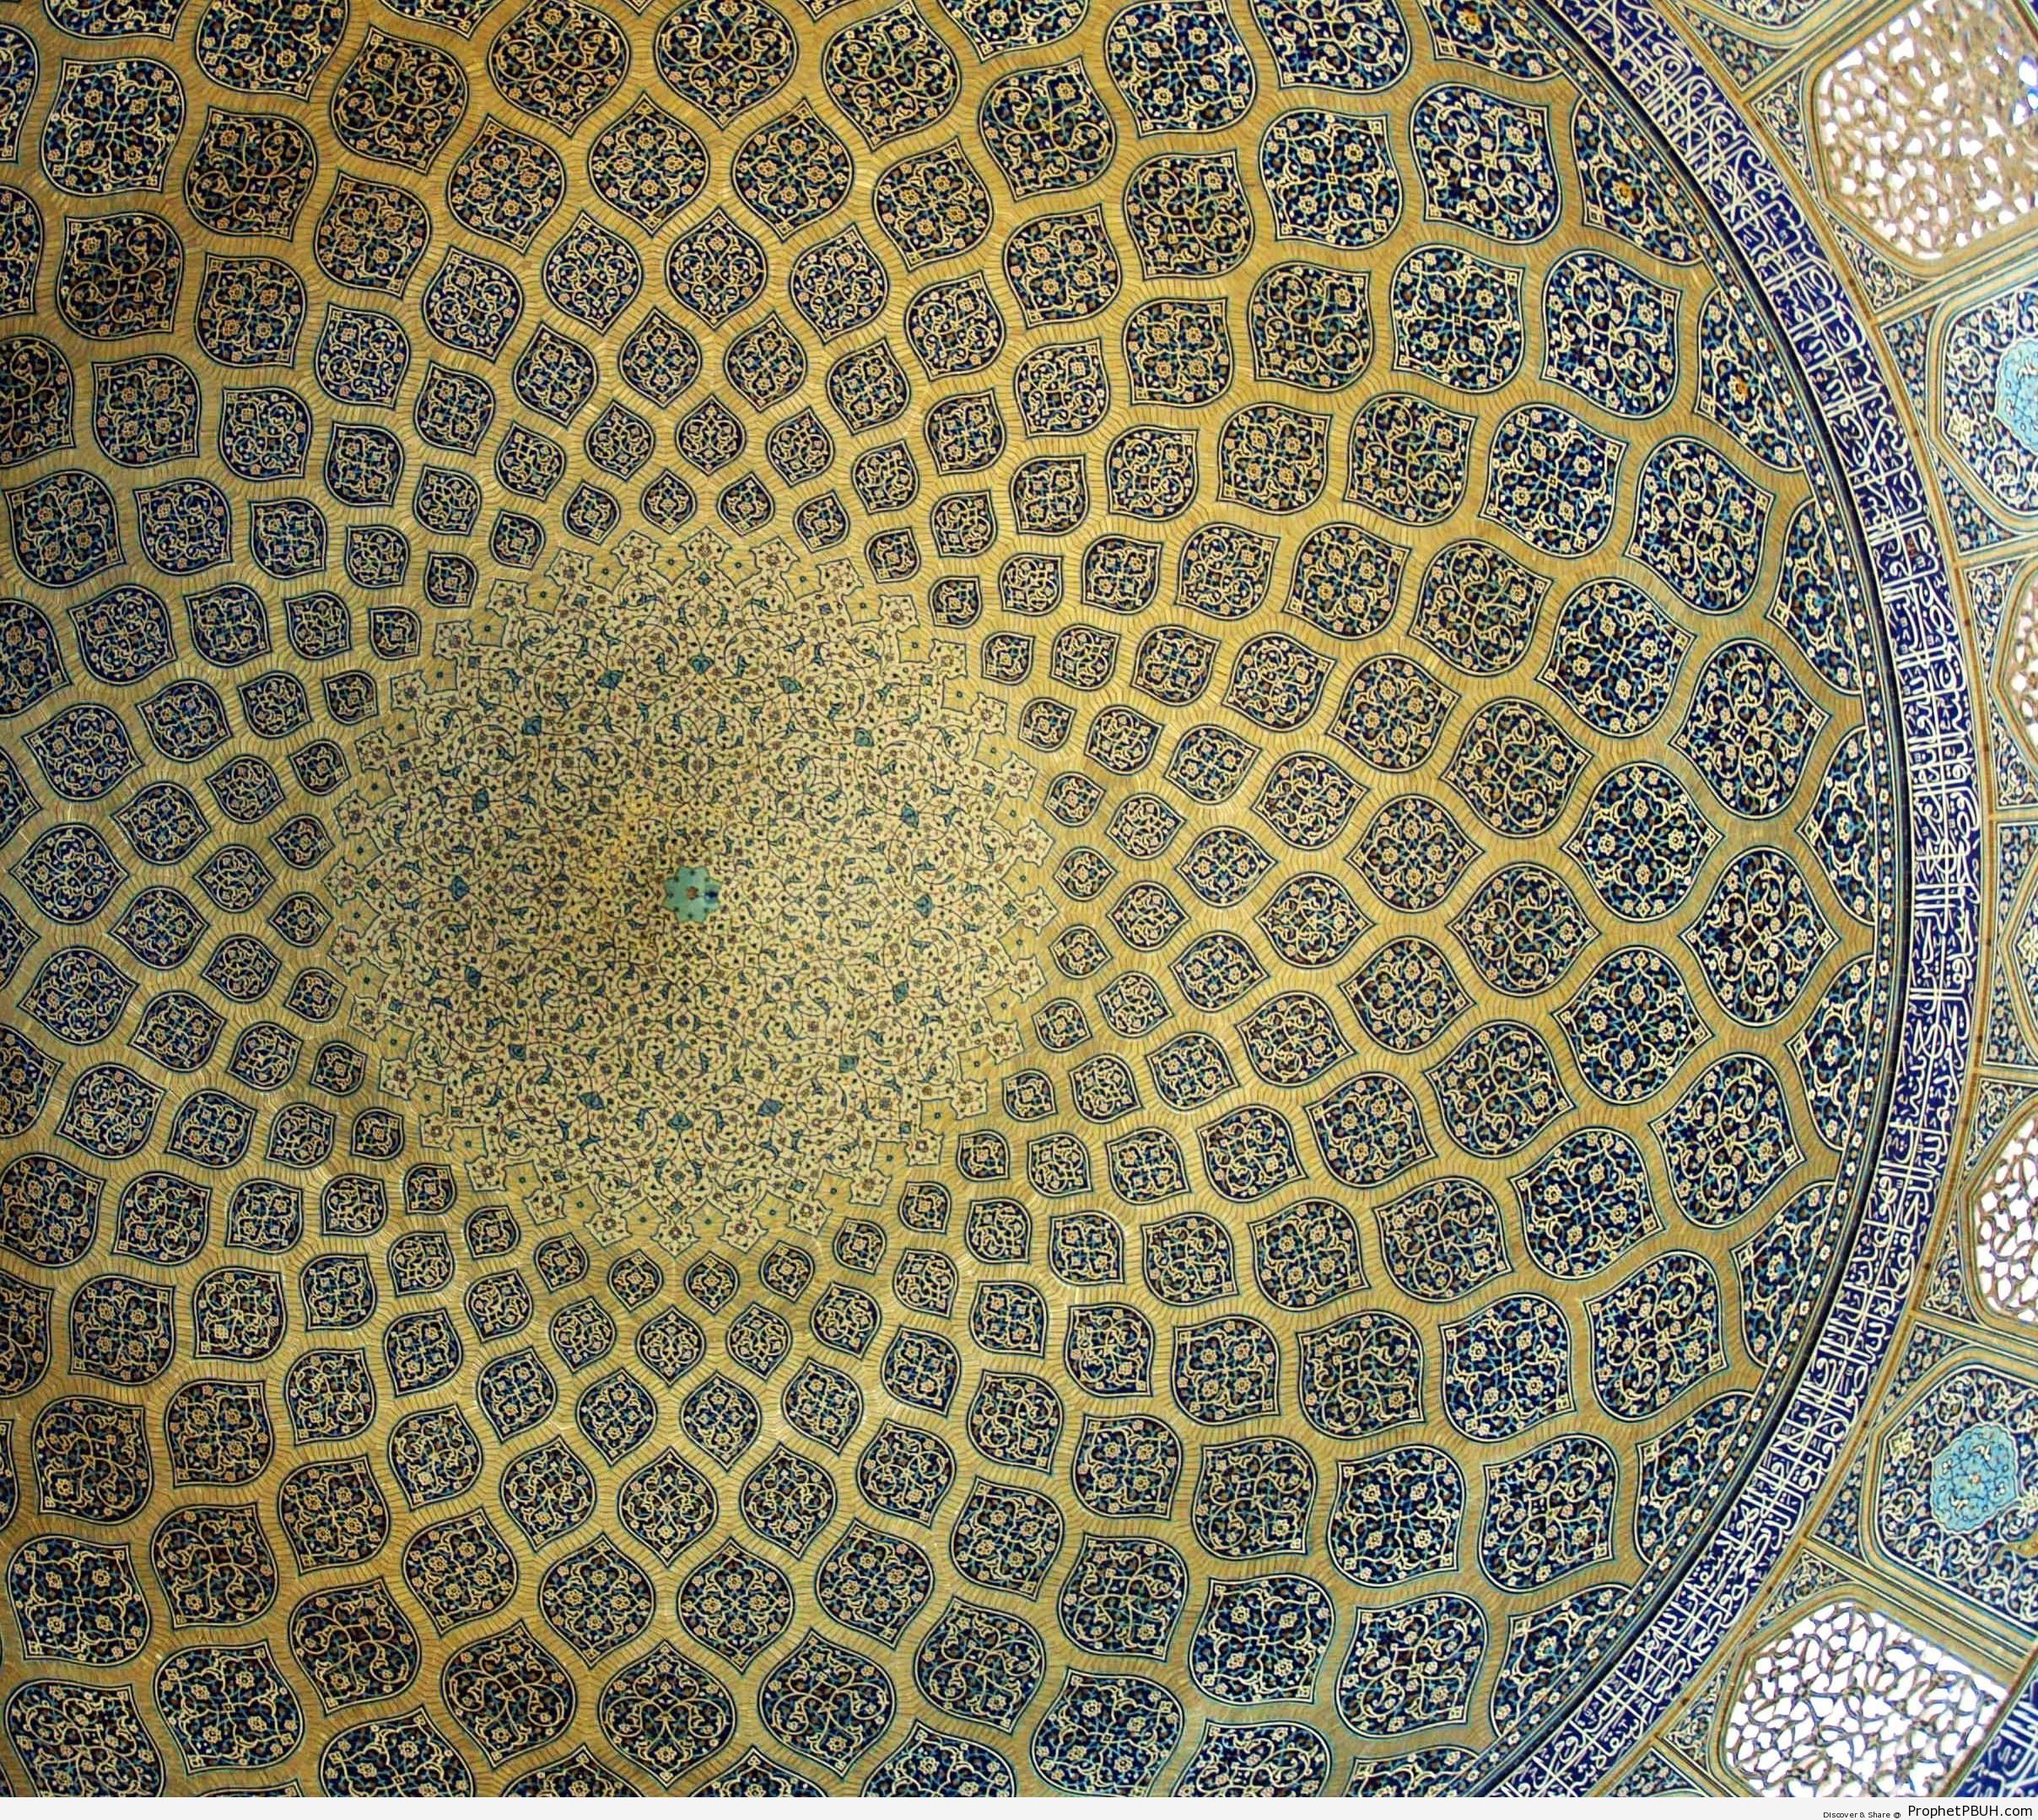 Photo of Islamic tiles at Lotfollah Mosque, Isfahan, Iran - Islamic Architecture -Picture